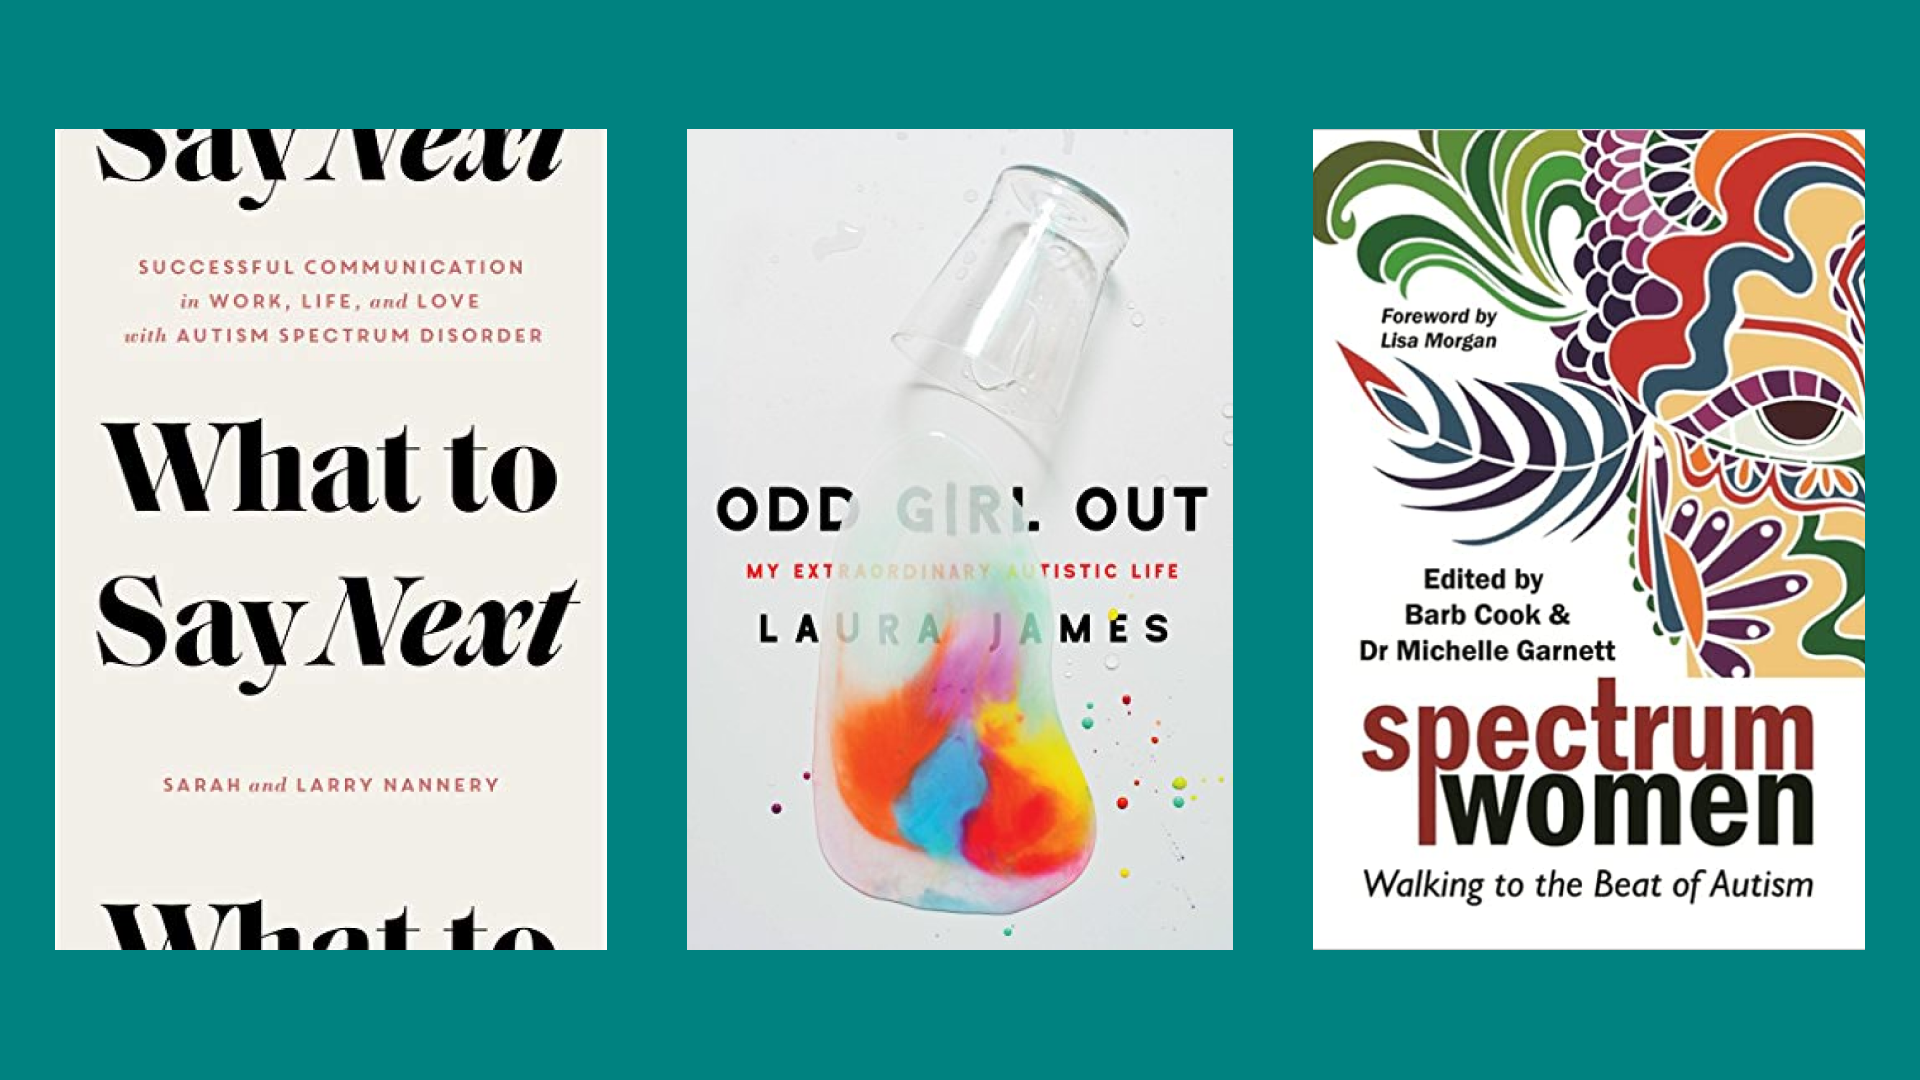 Three books about autism: "What to Say Next," "Odd Girl Out," and "Spectrum Women"